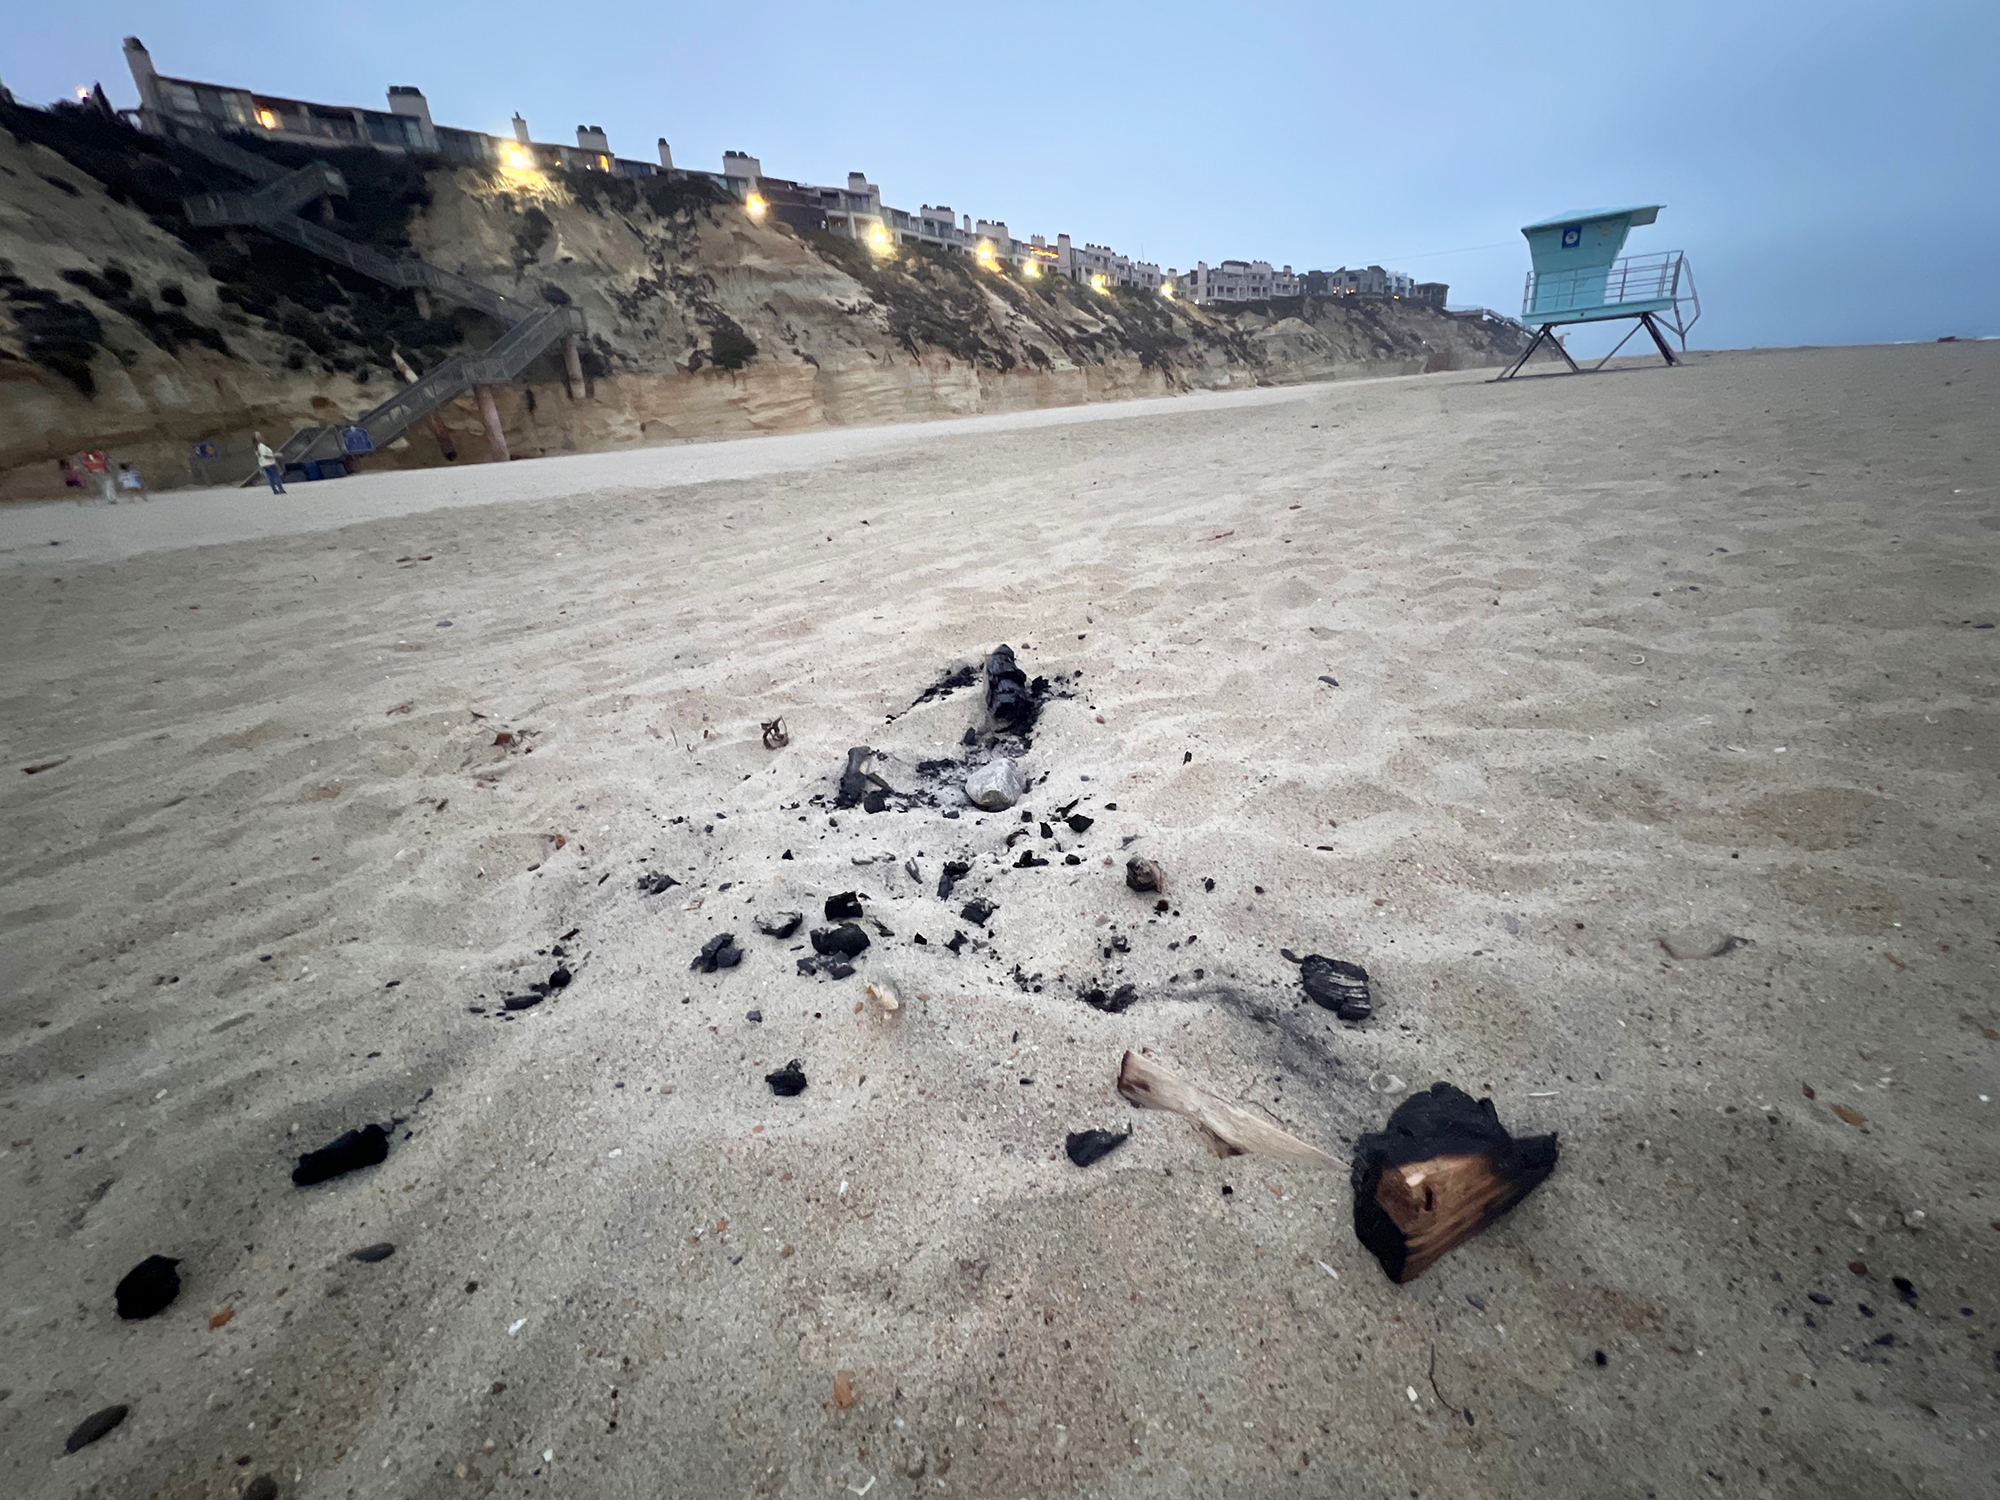 Beach Fires Guidelines and Responsible Practices